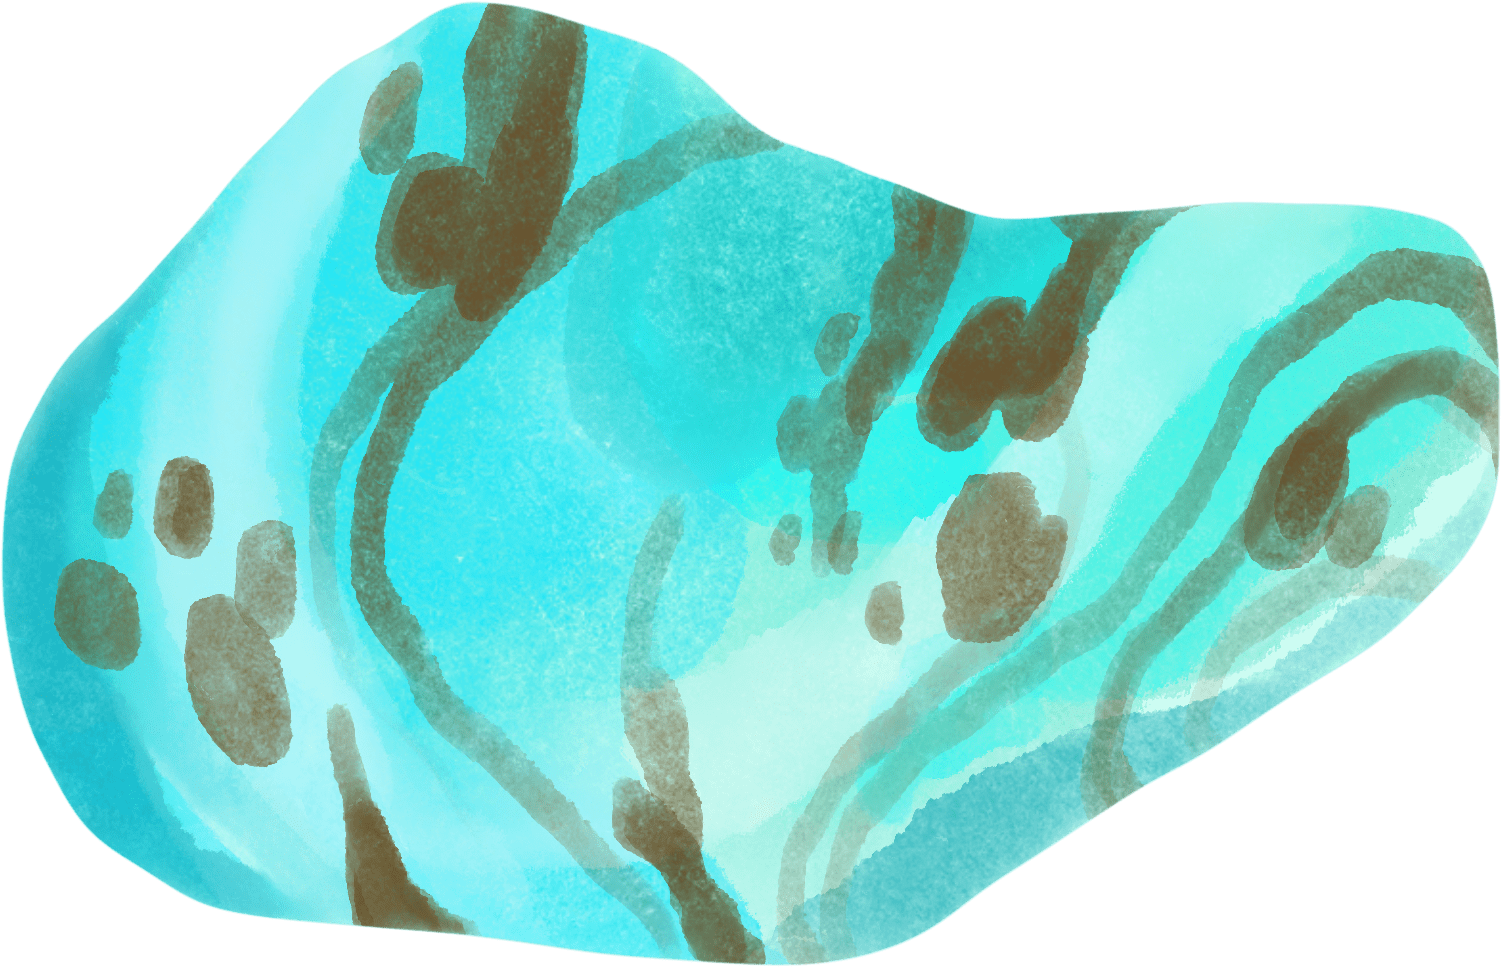 Image of Turquoise